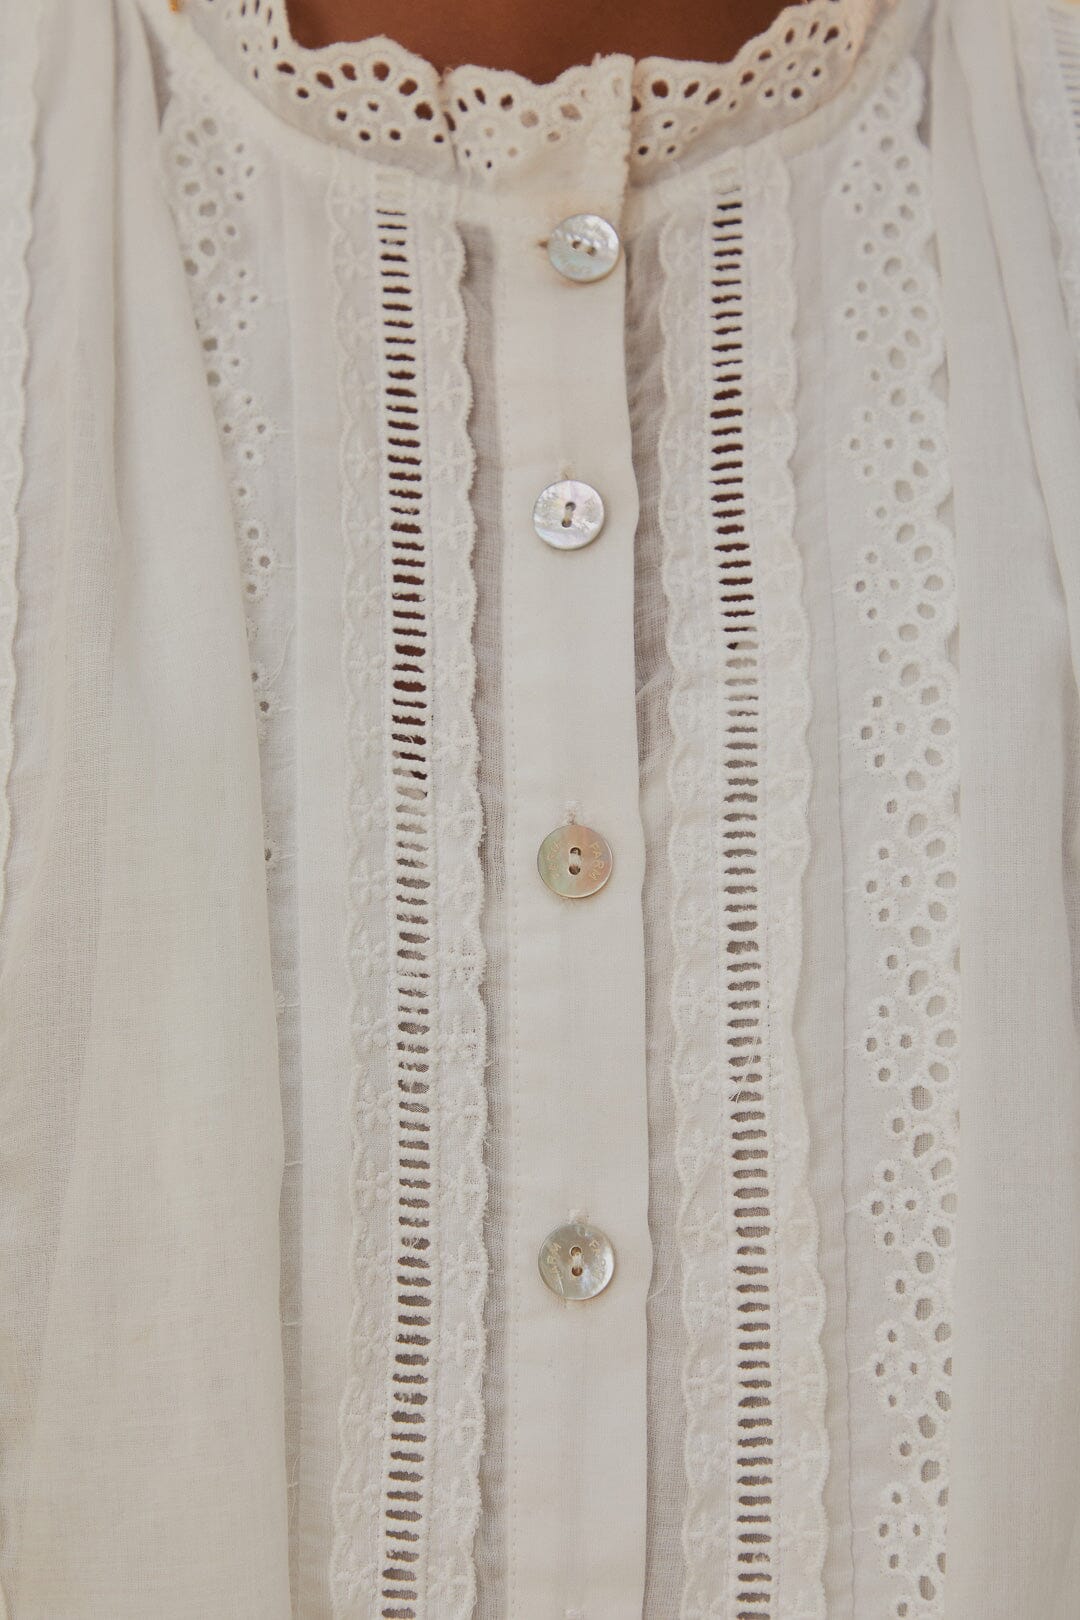 Embroidered White Blouse